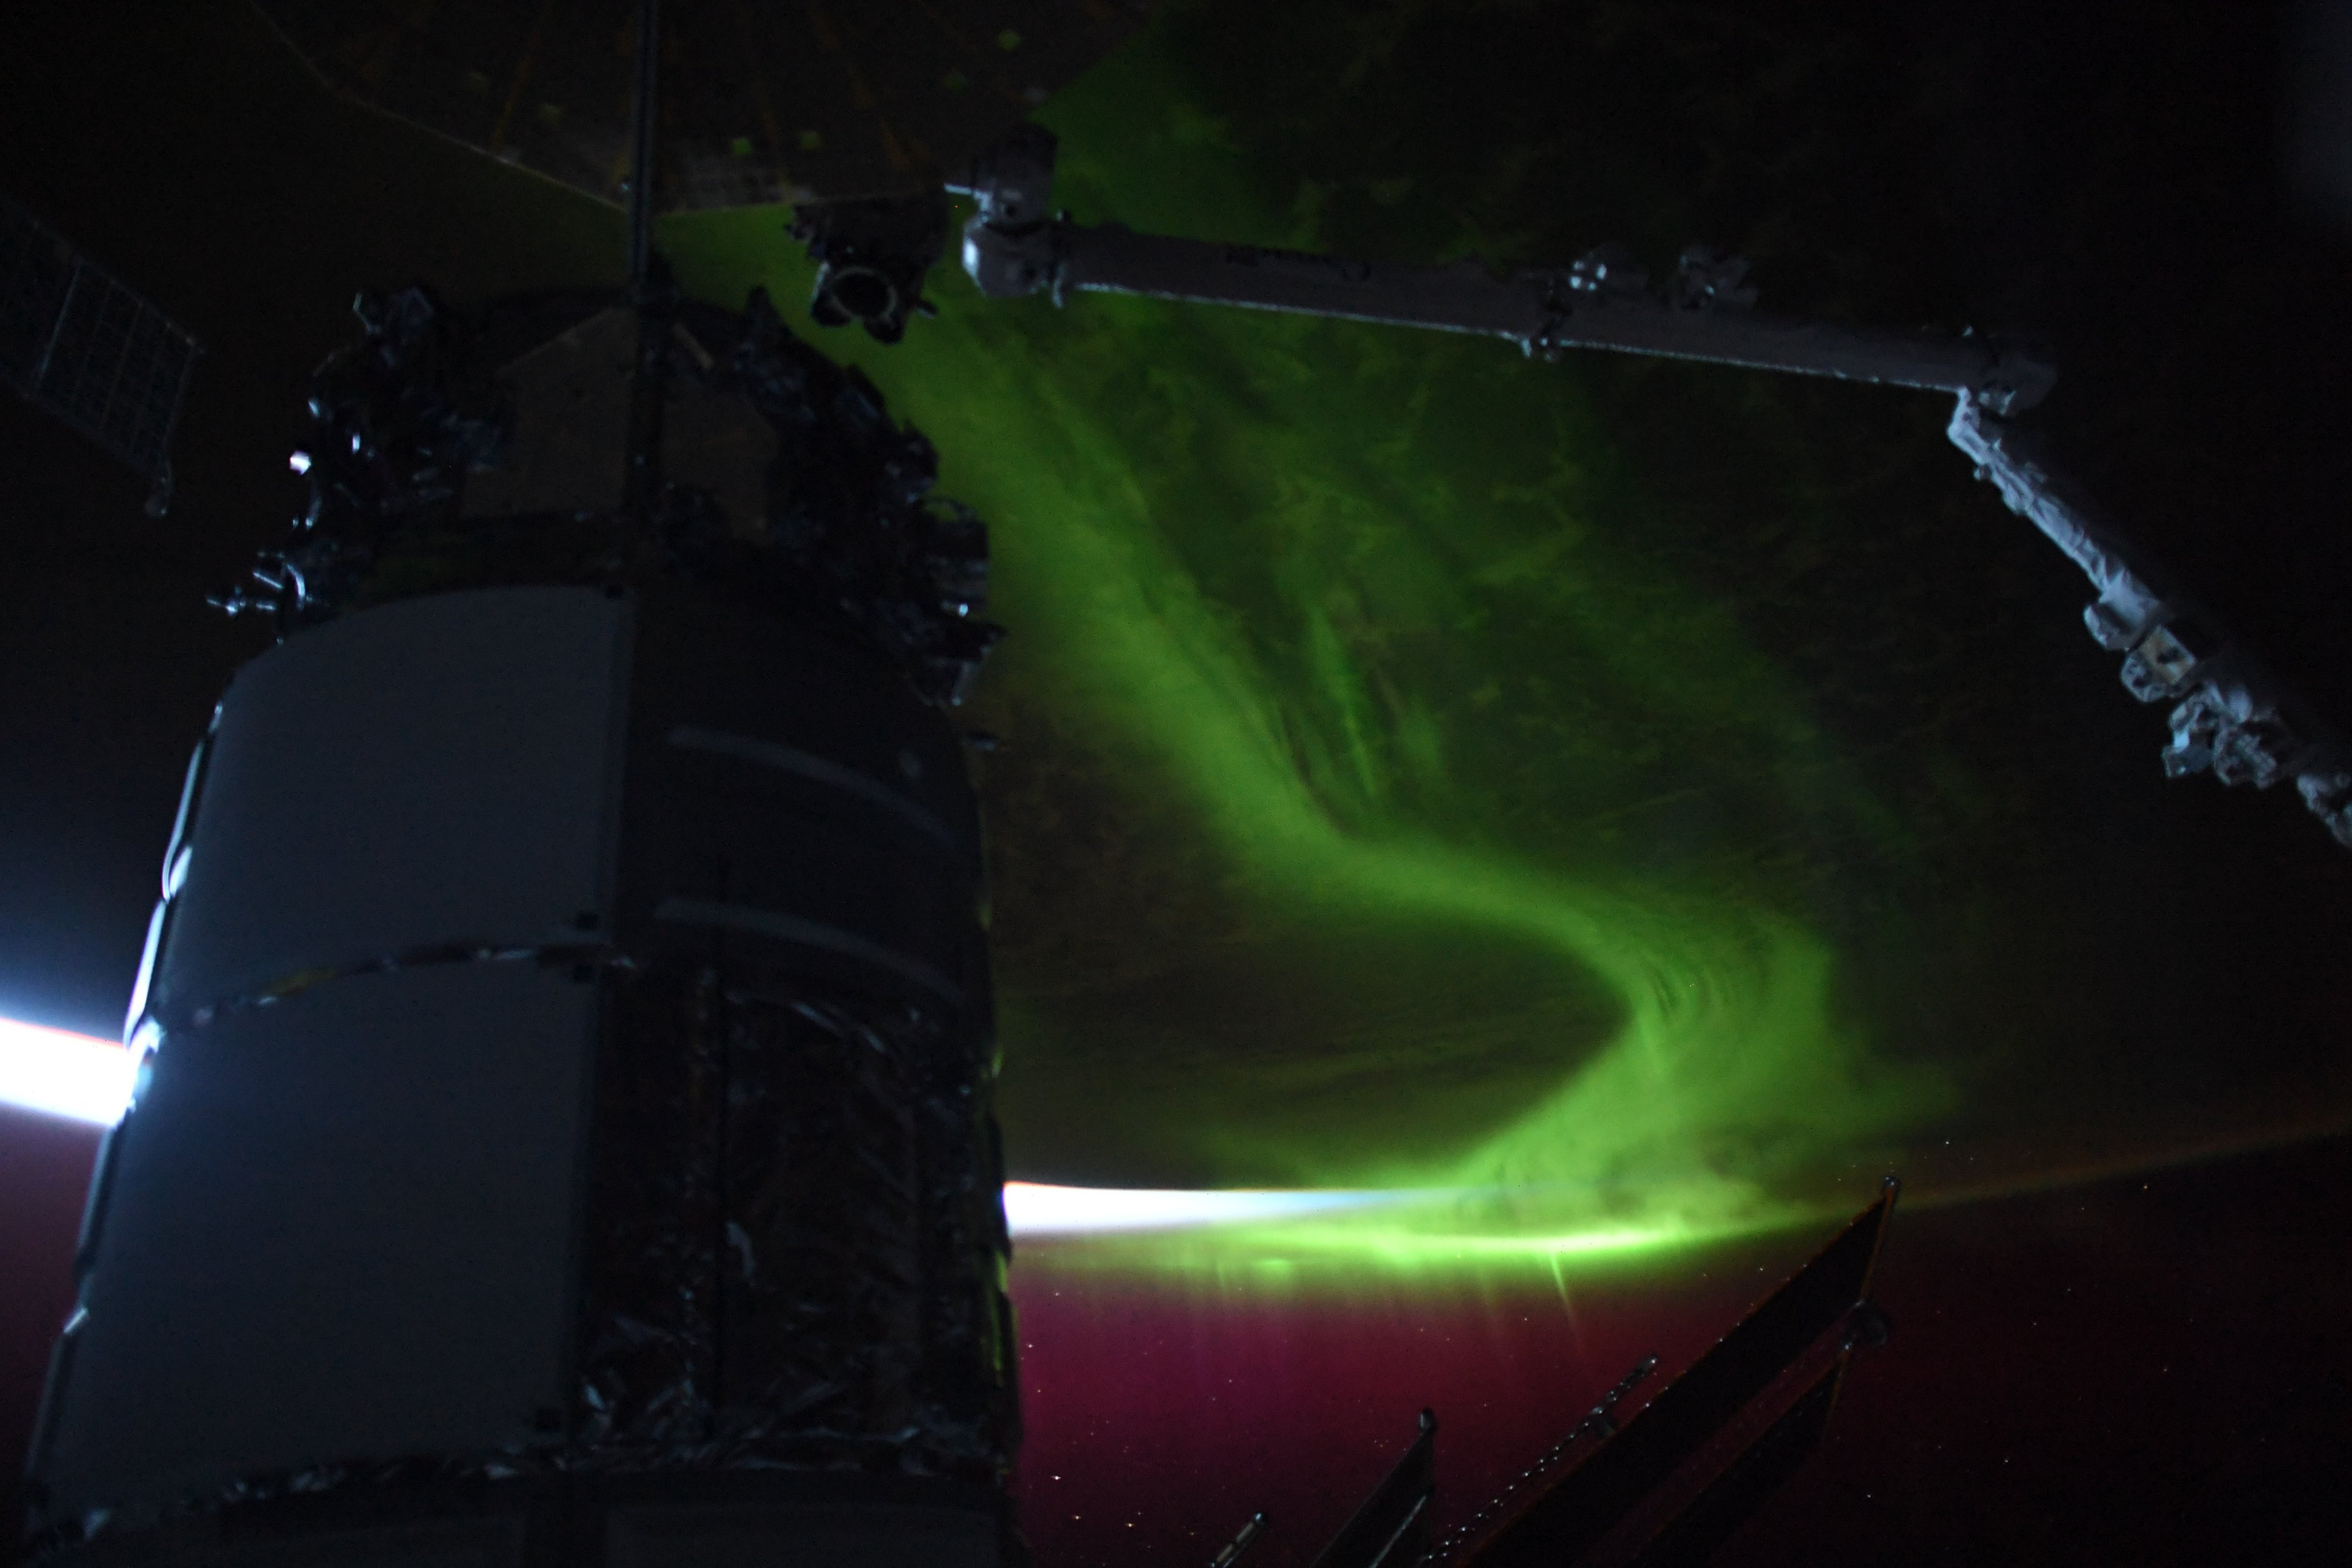 the dark, nearly silhouetted shape of a cylindrical spacecraft rises from the left, briefly reflecting the slice of white light curved from the horizon of Earth from space, seen above. a robotic arm reaches to the mass from the right, as behind a swath of green aurora smears across the dark face of the planet.